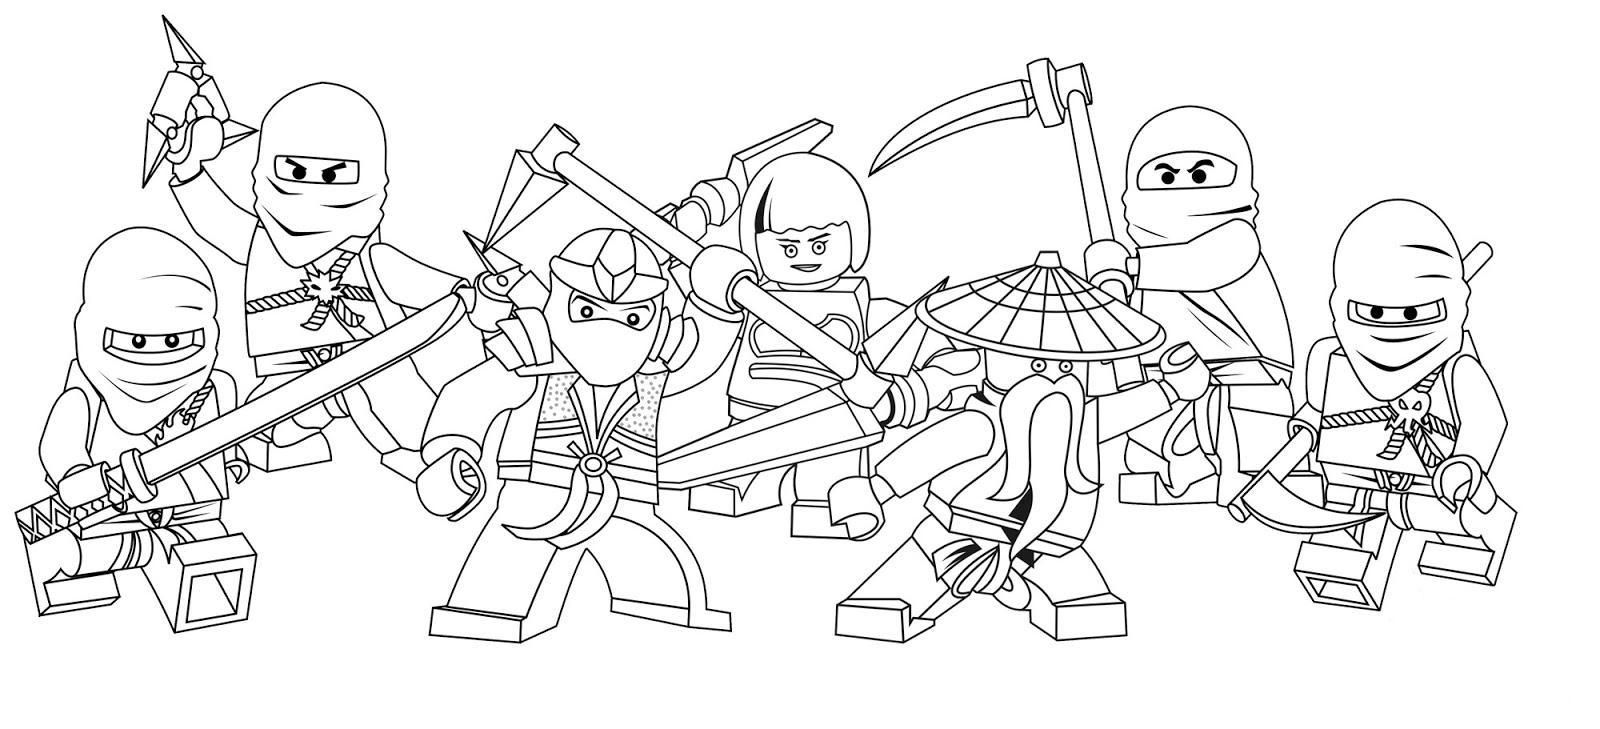 Lego Ninjago Coloring Pages To Print Lego Coloring Pages To Print ...